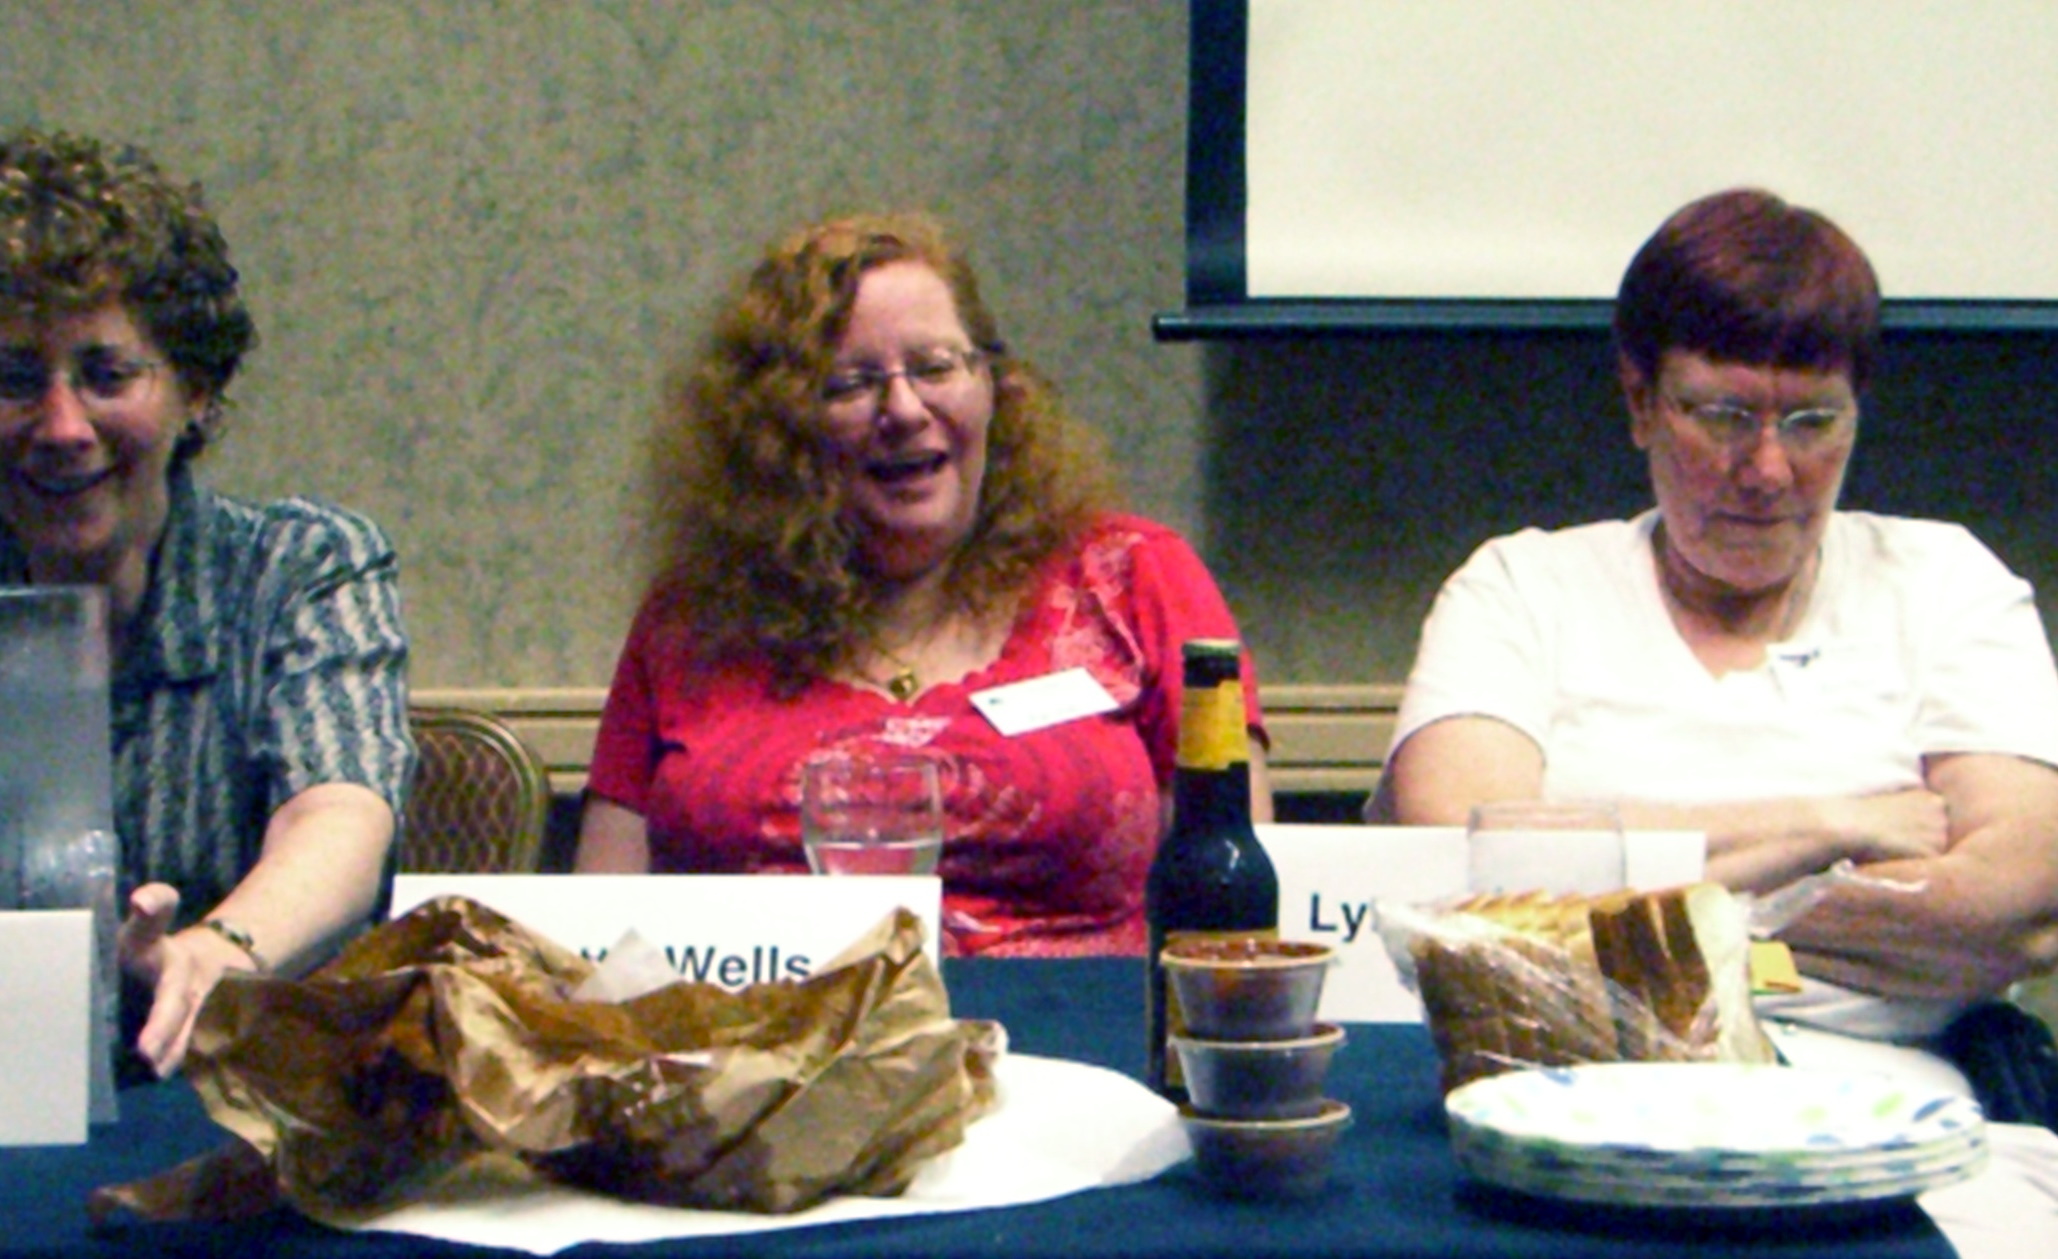 Con disaster stories panelists, left to right, Janice Gelb, Patty Wells, and Lynn Ward, behind the barbewue leftovers